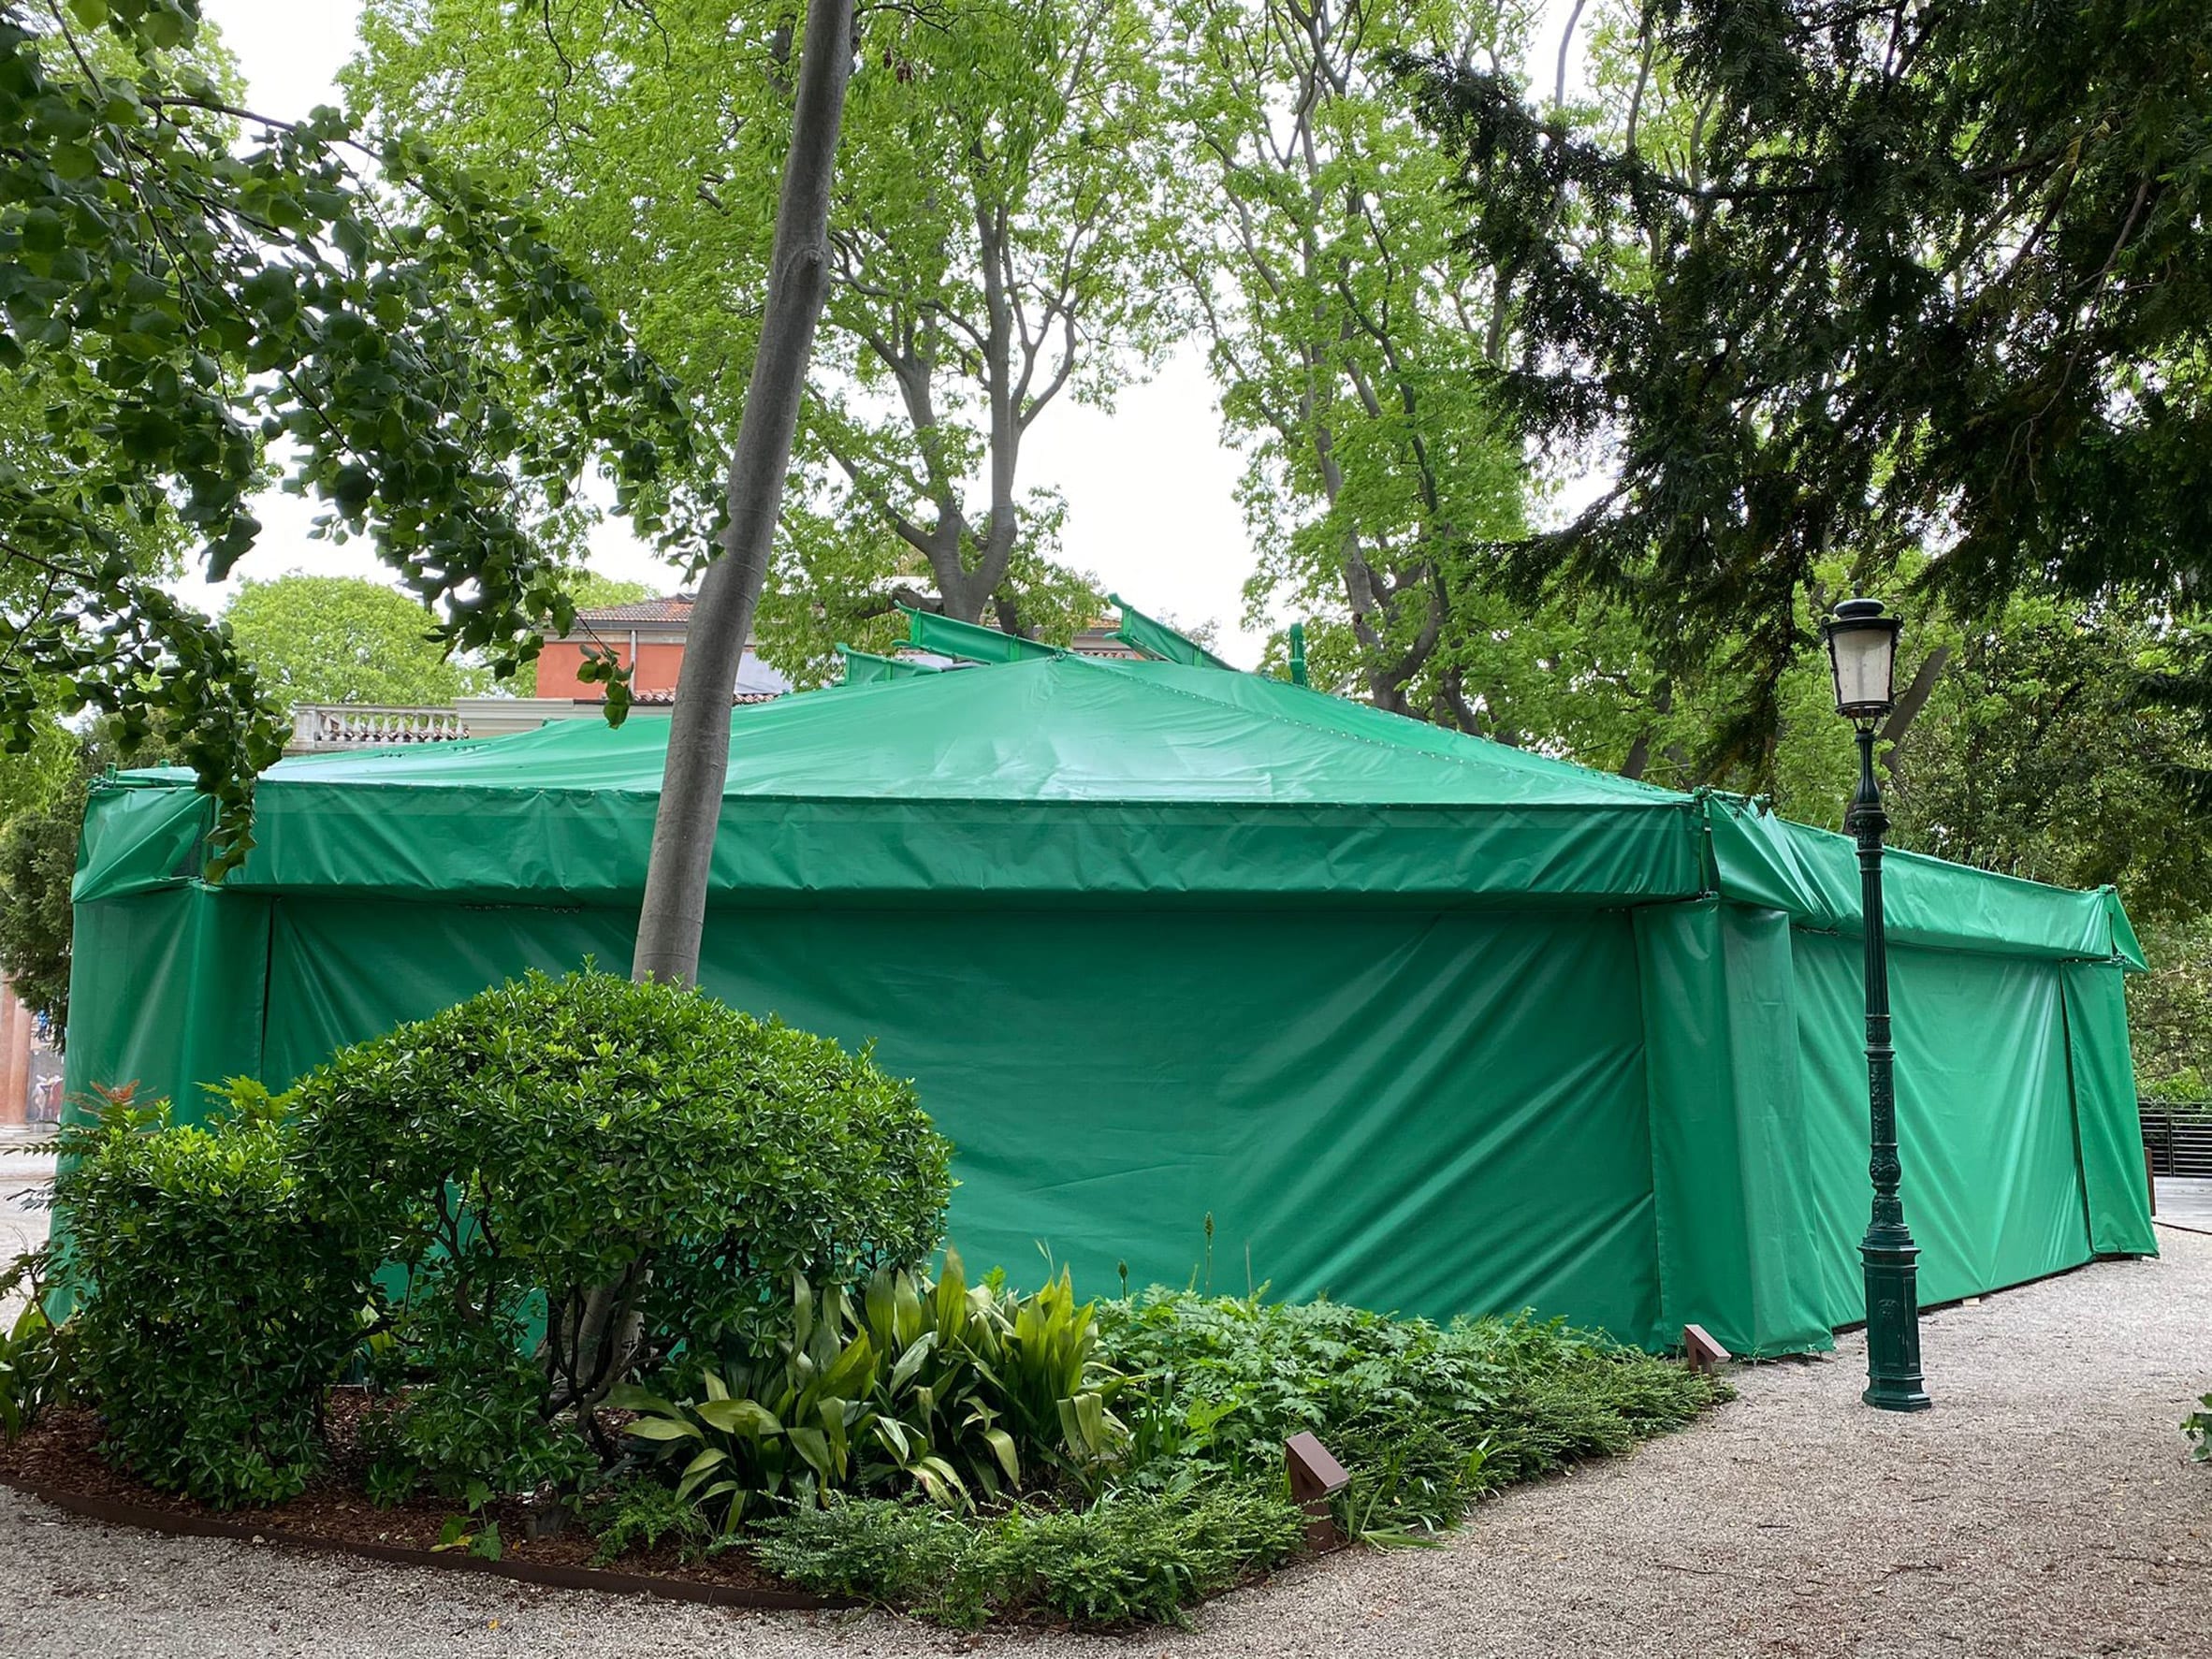 Canadian pavilion wrapped in green sheeting